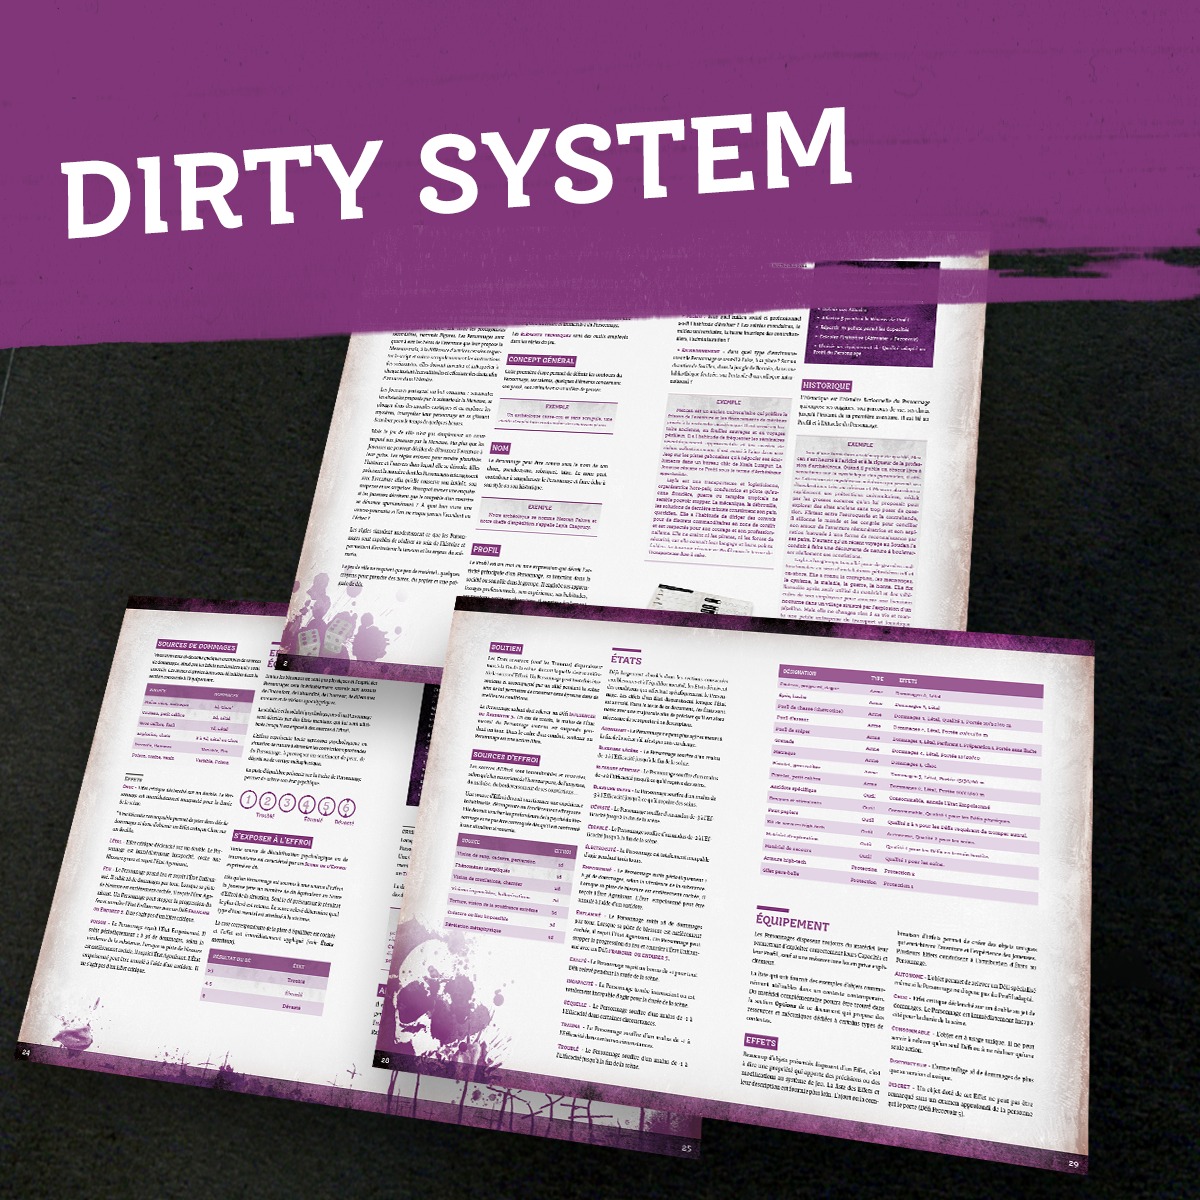 Le Dirty System